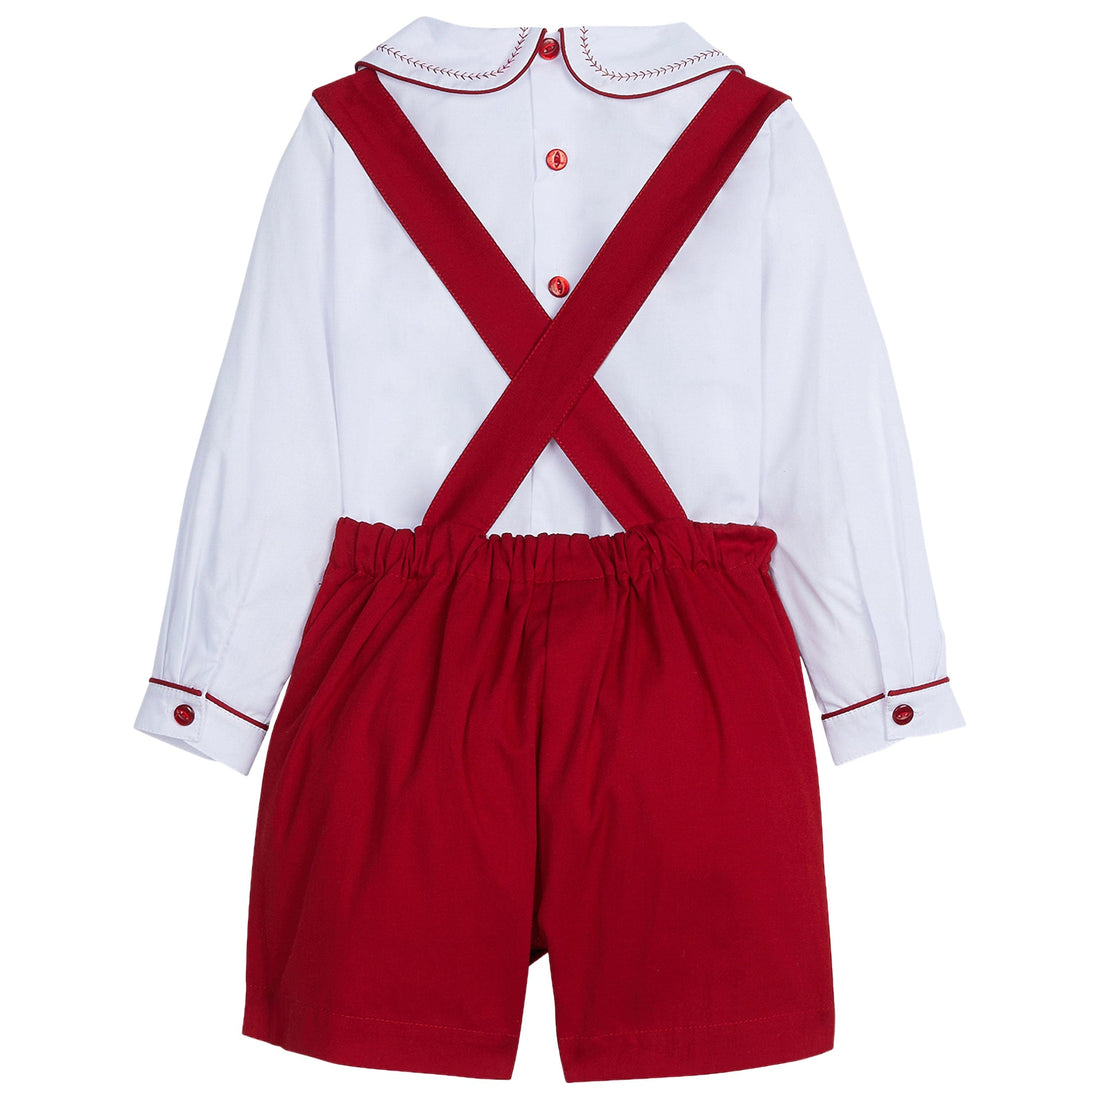 little english classic childrens clothing boys shortall set with white peter pan shirt with red piping and red whipstitch detail on collar